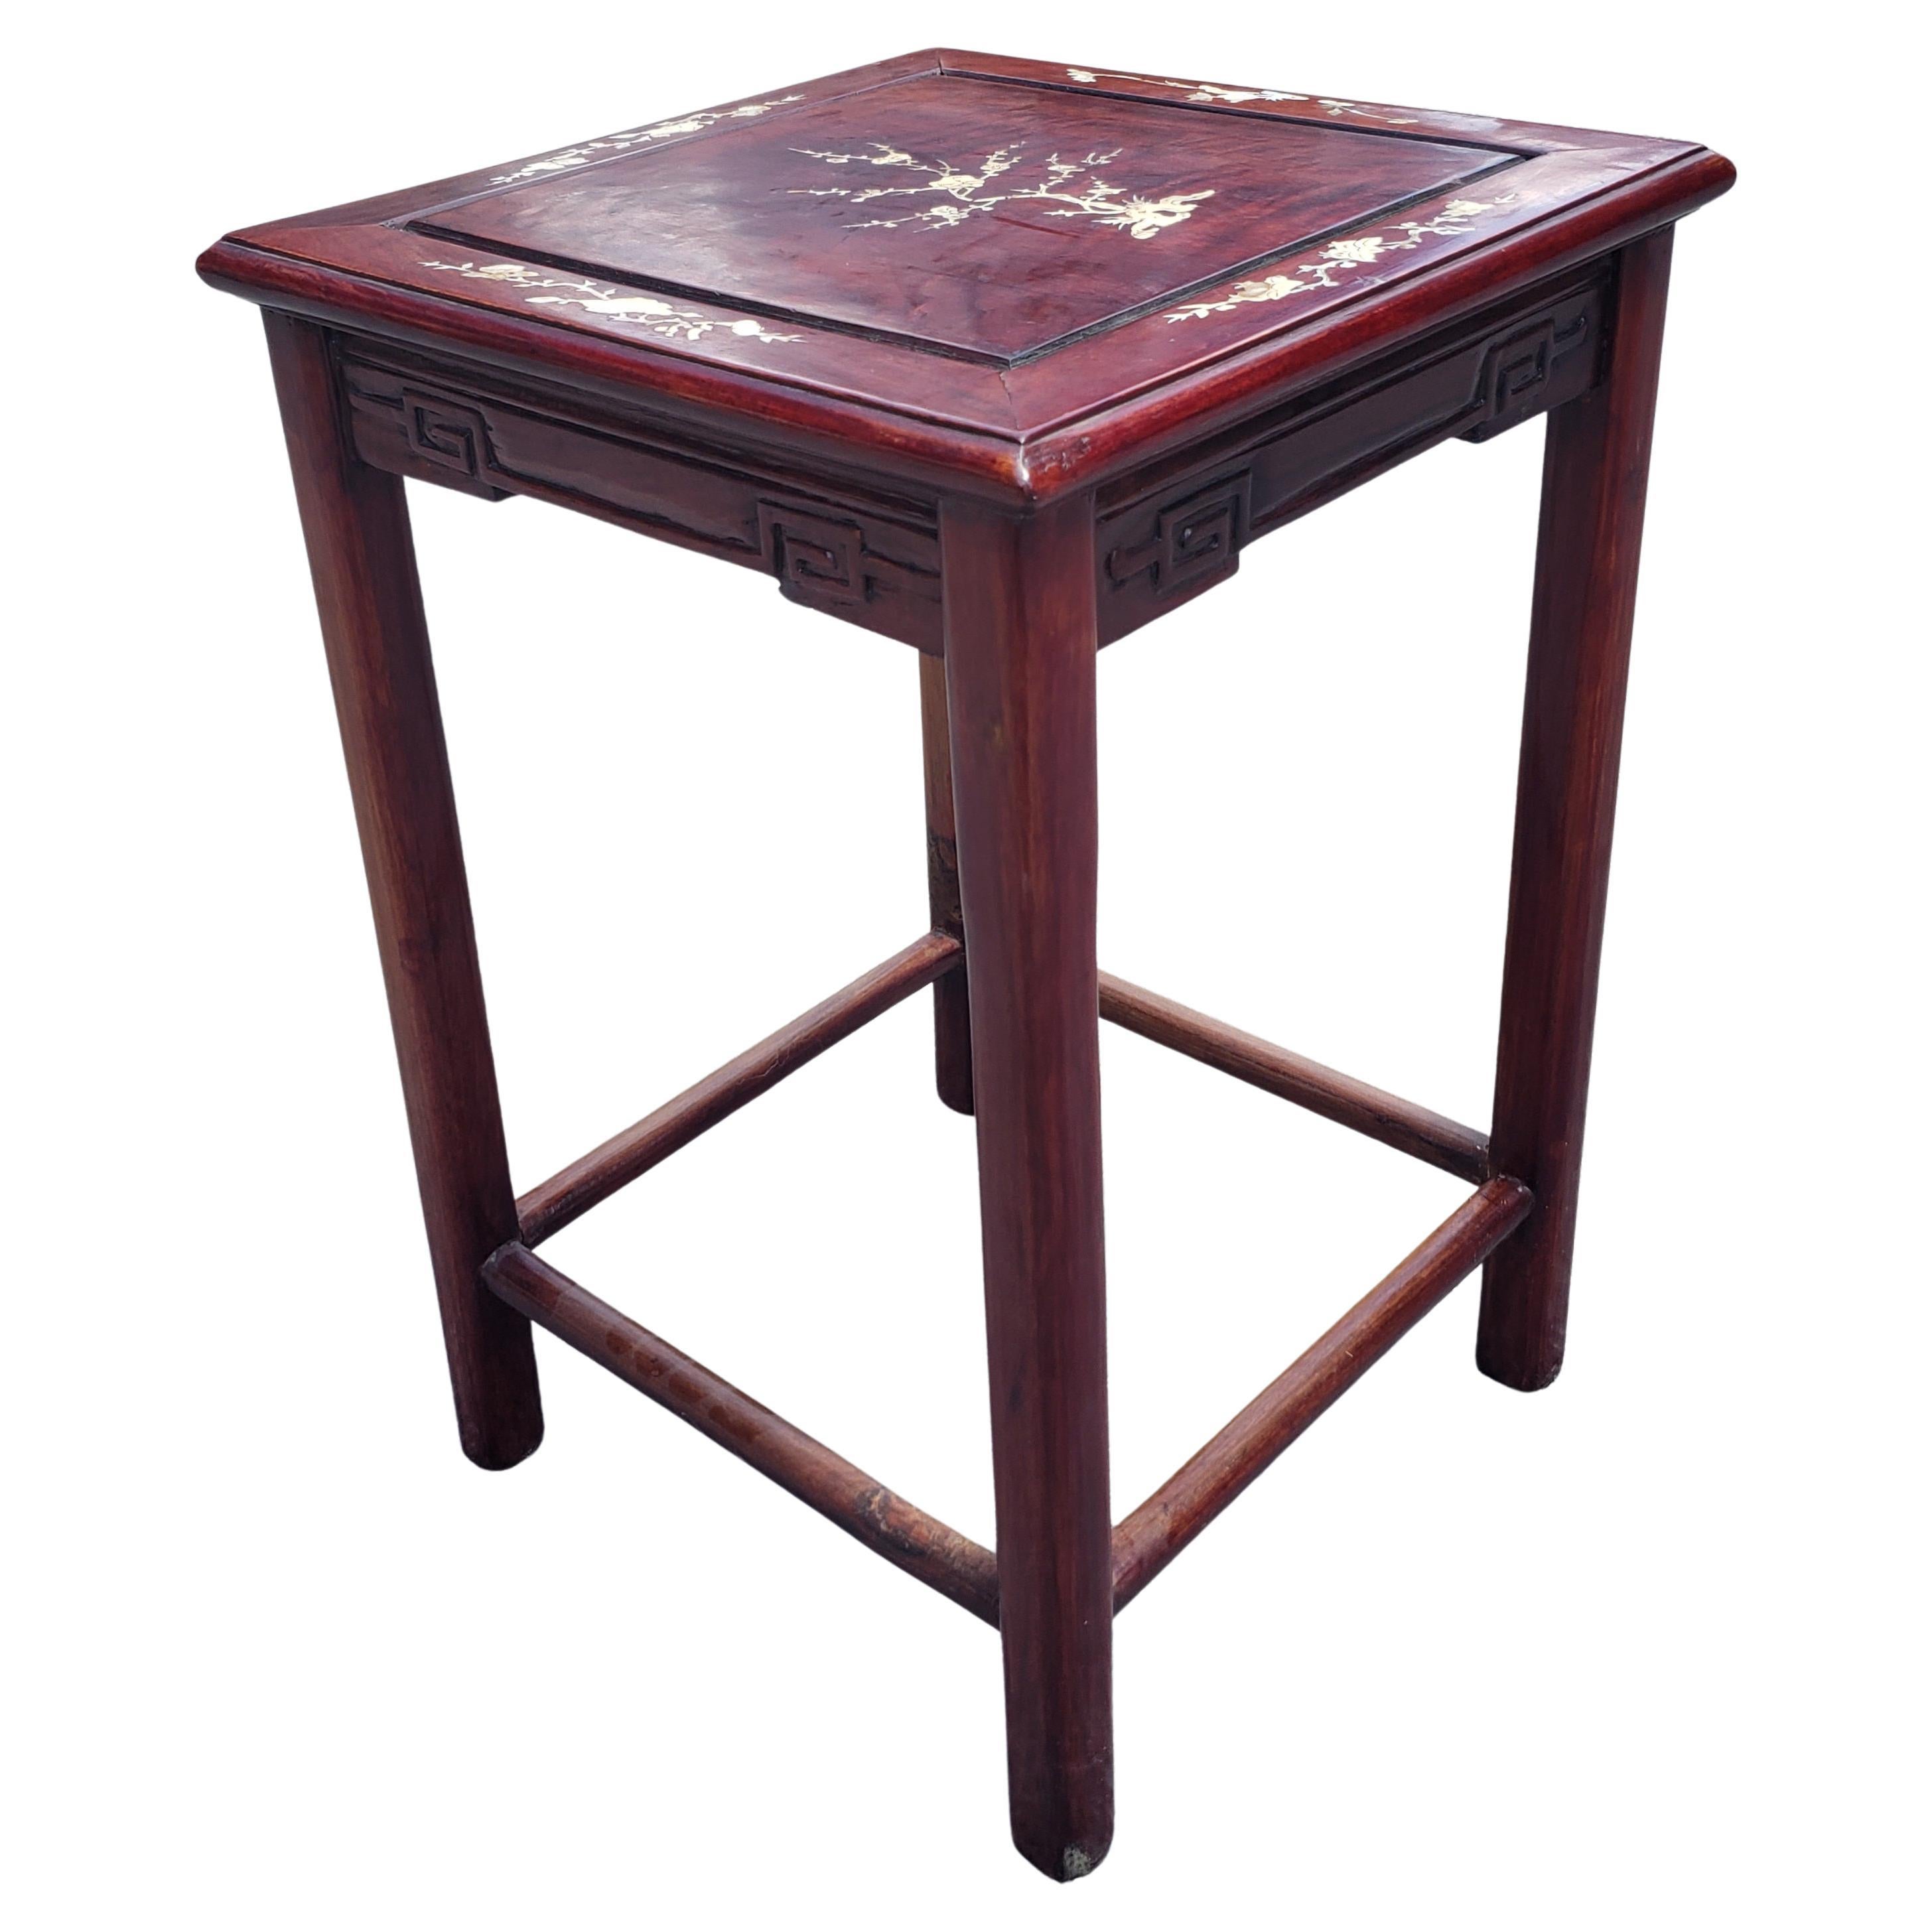 Rosewood Mother-of-pearl Inlay side table in very good condition.
Measures 16.25